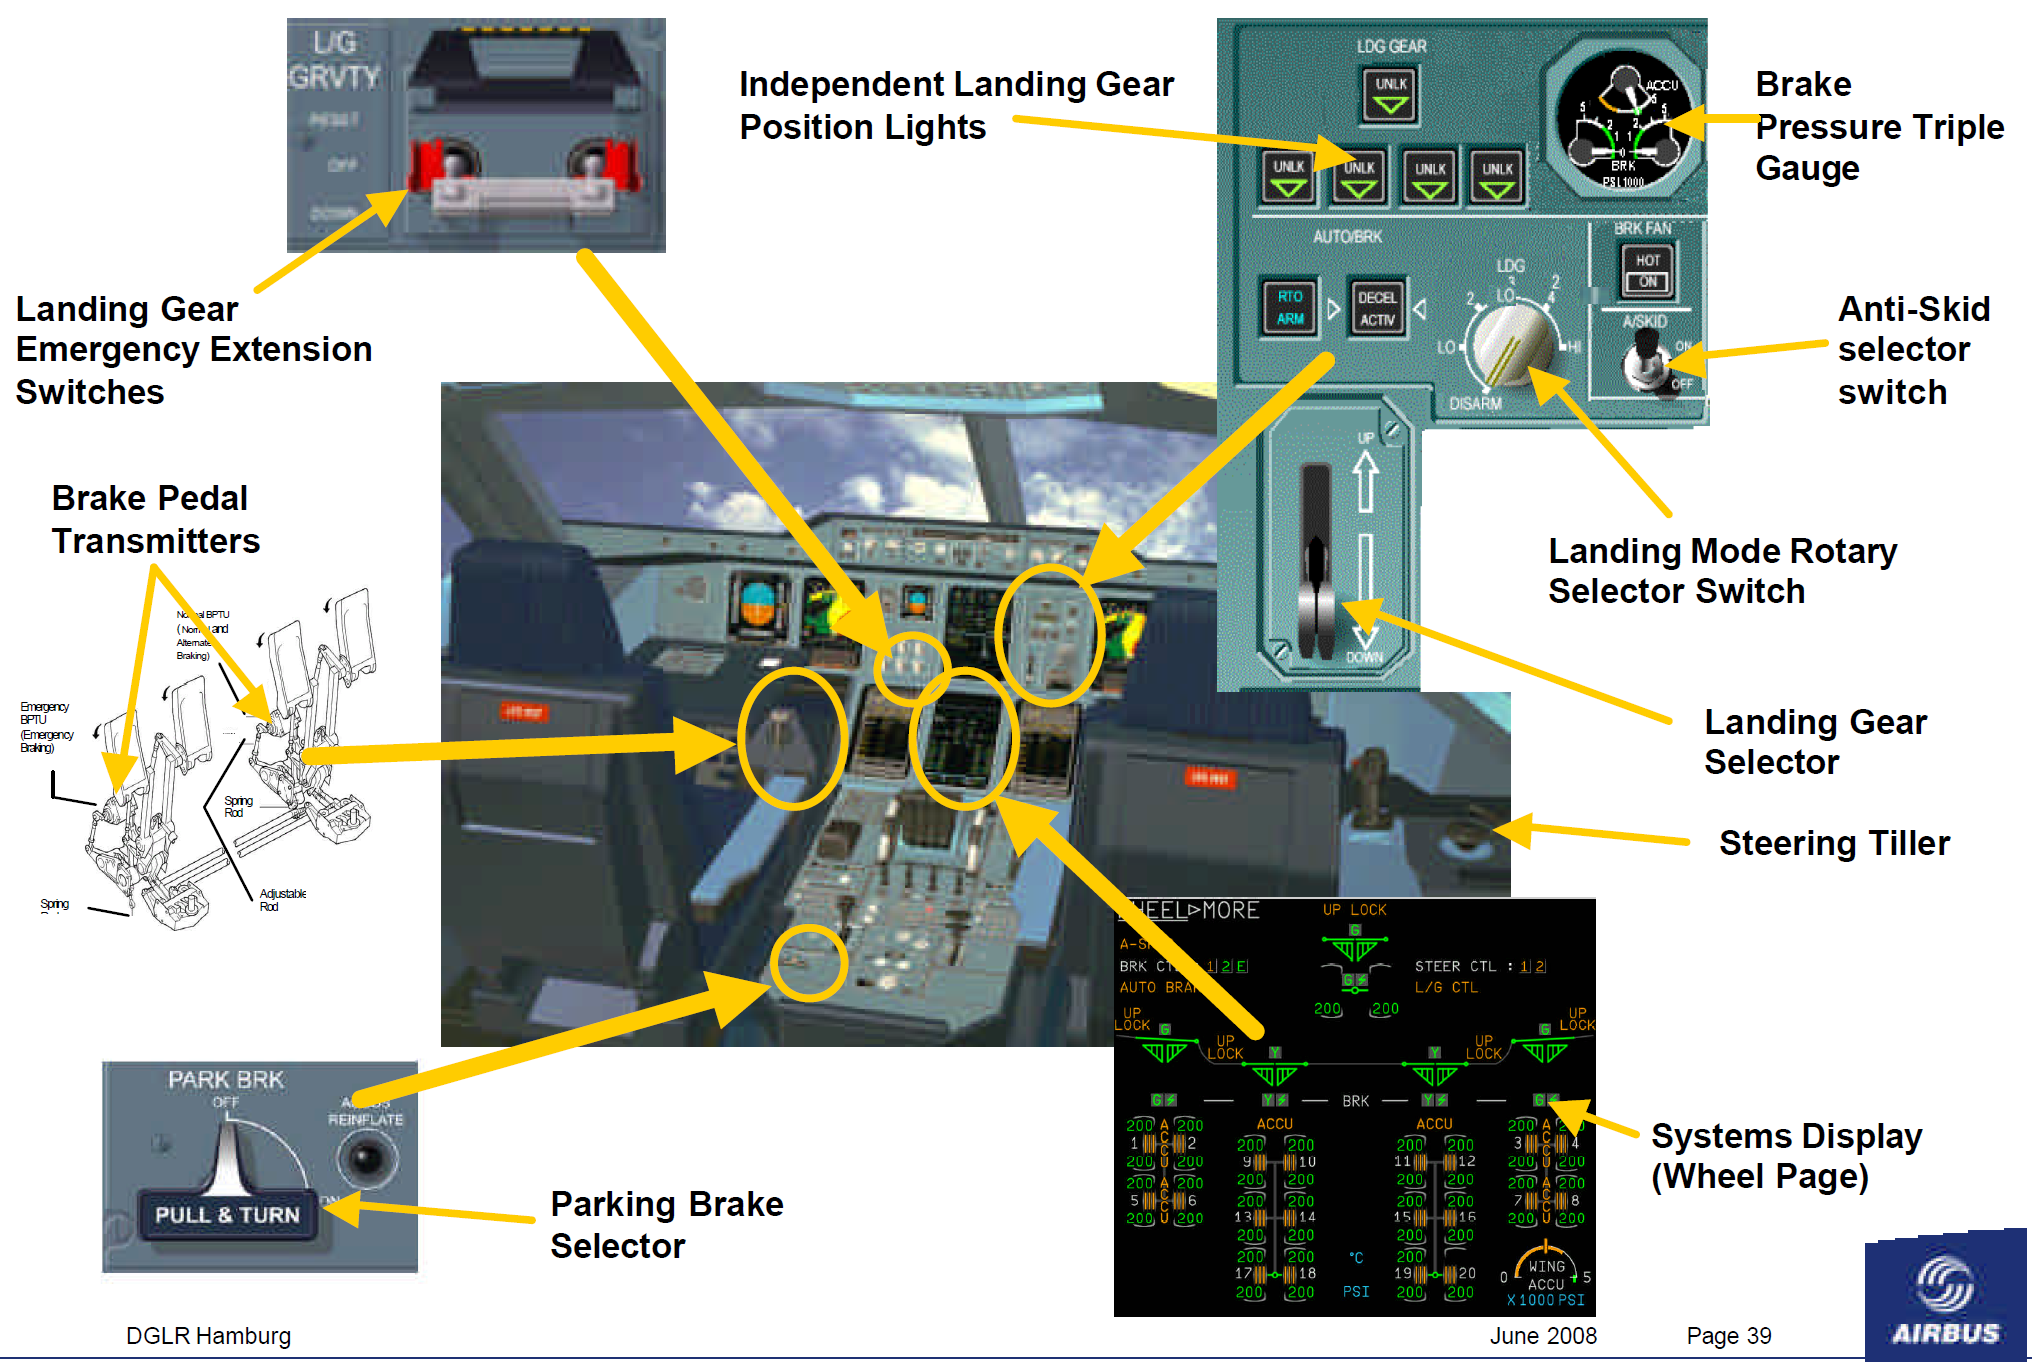 Cockpit controls, display and indicators for the A380’s landing gear and brakes. Source: Airbus (Click image to enlarge)